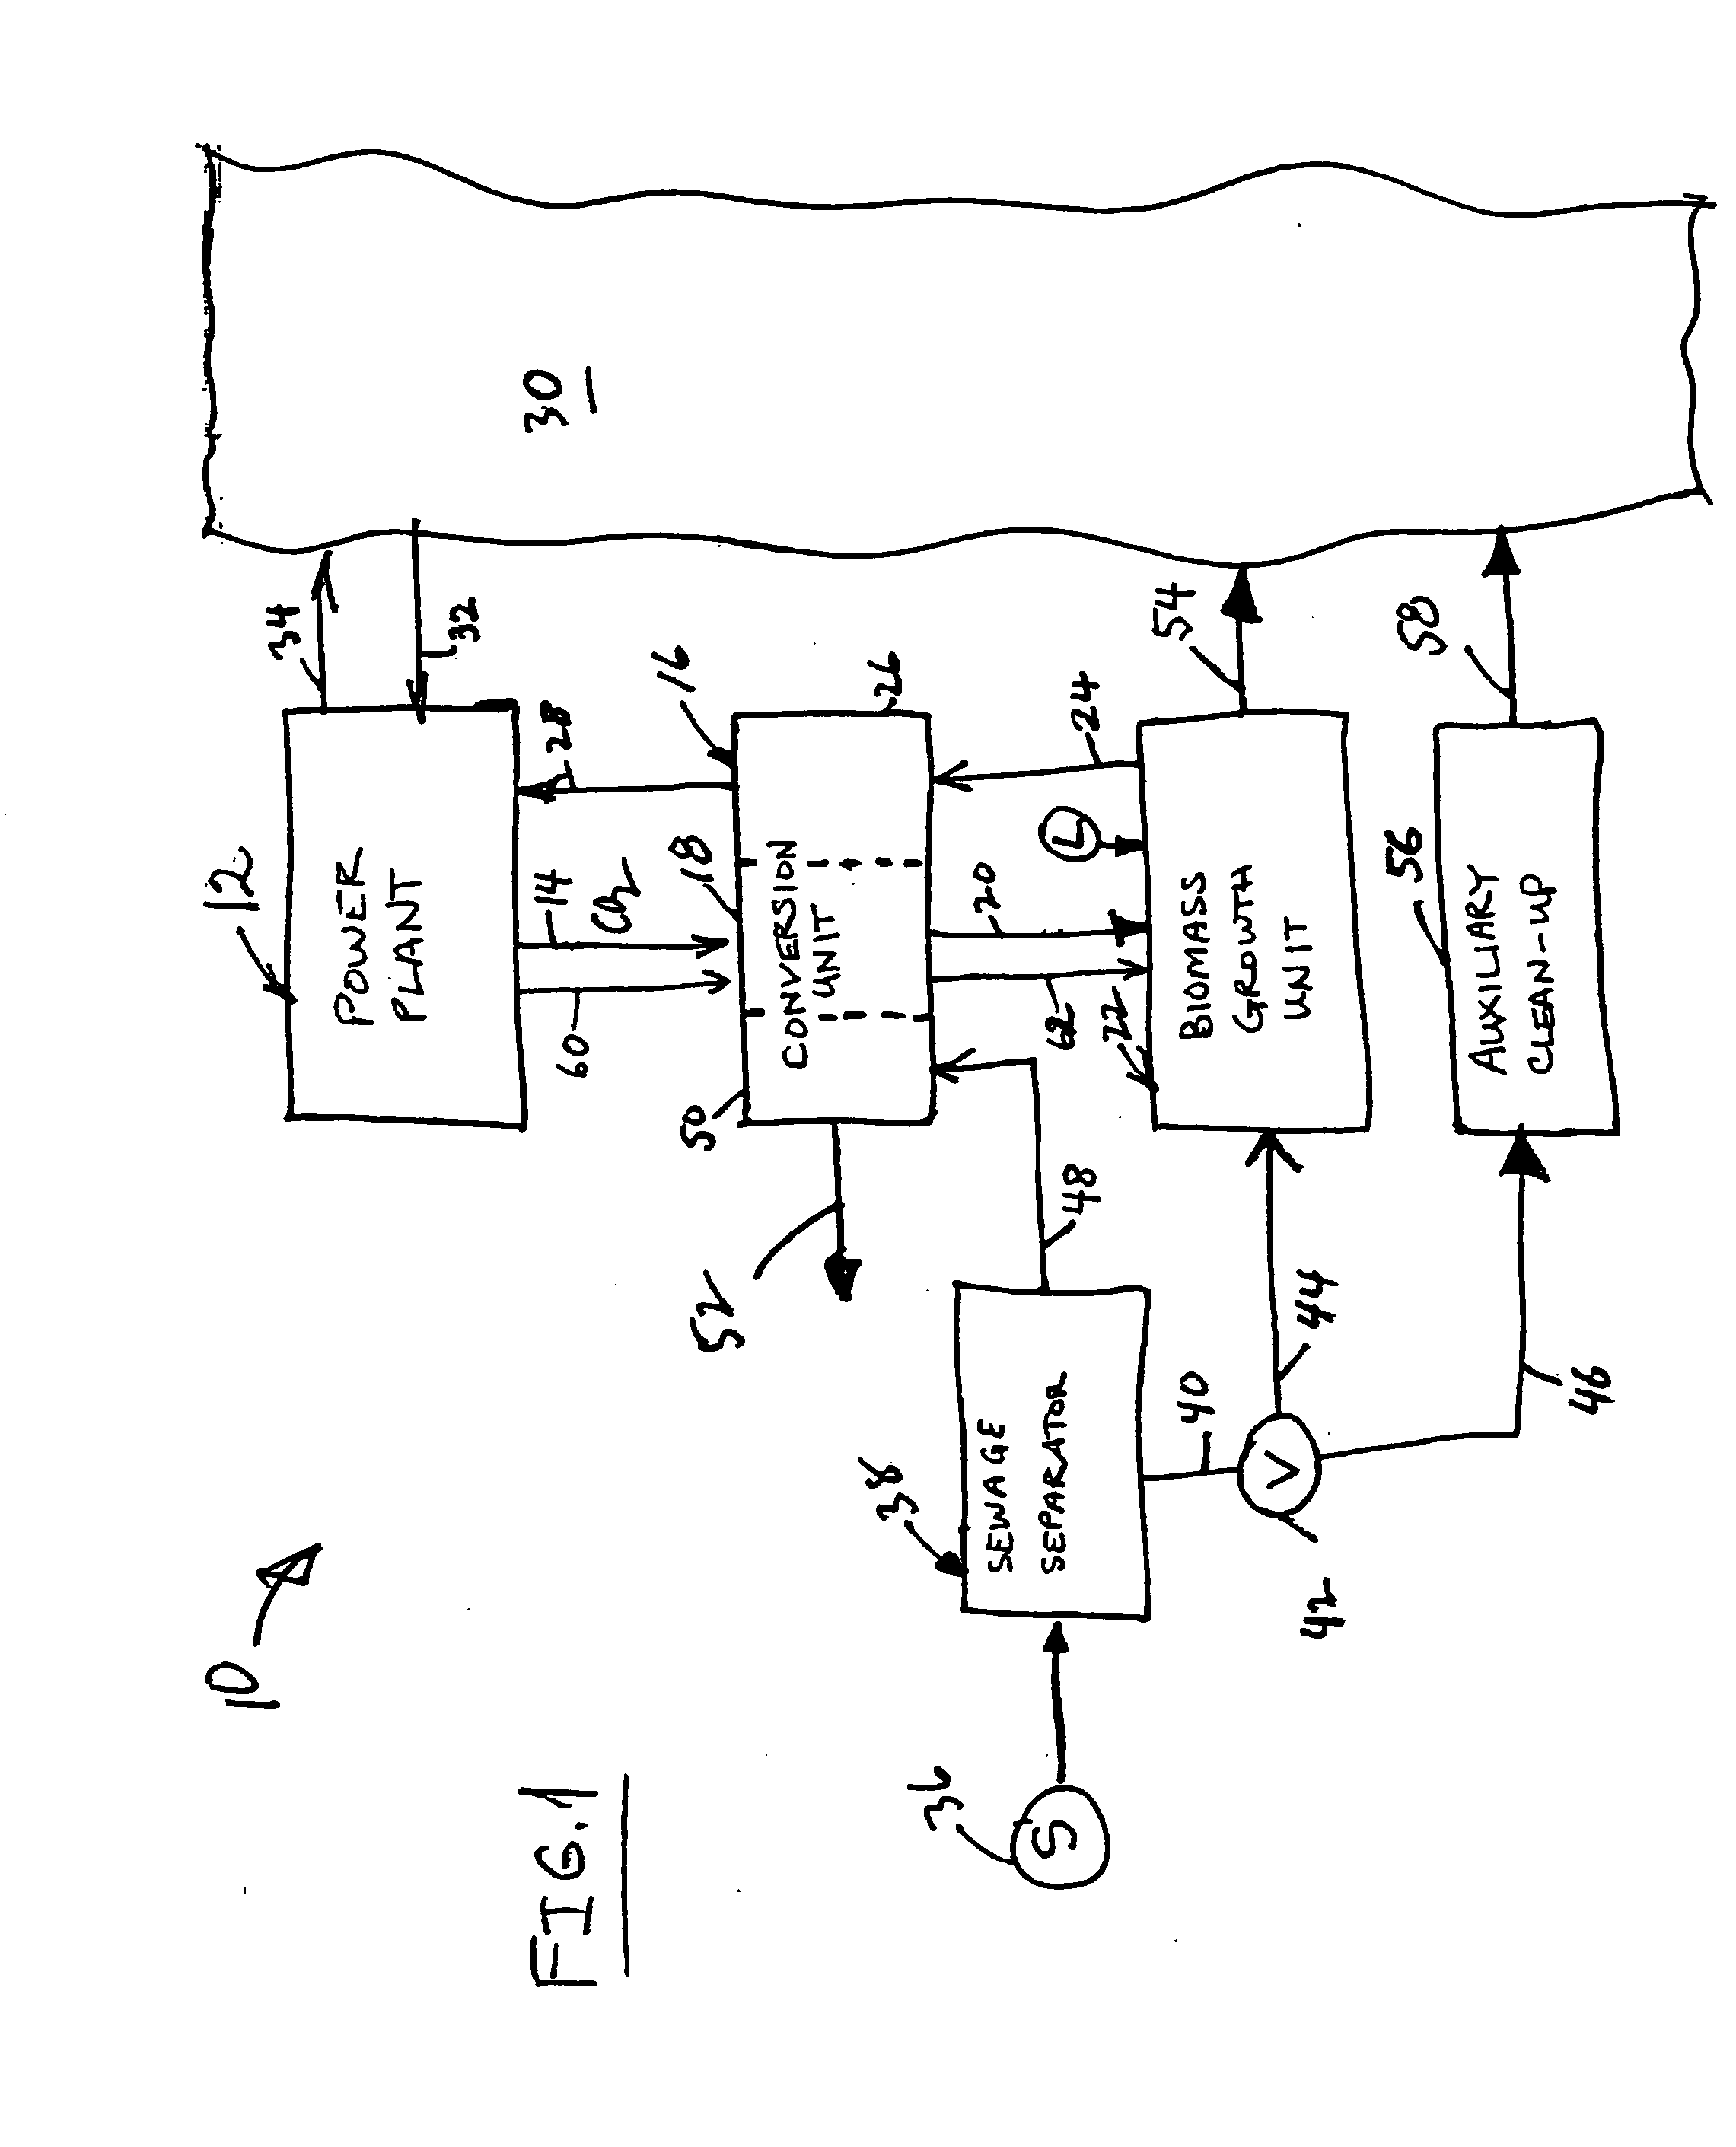 Integrated power plant, sewage treatment, and aquatic biomass fuel production system